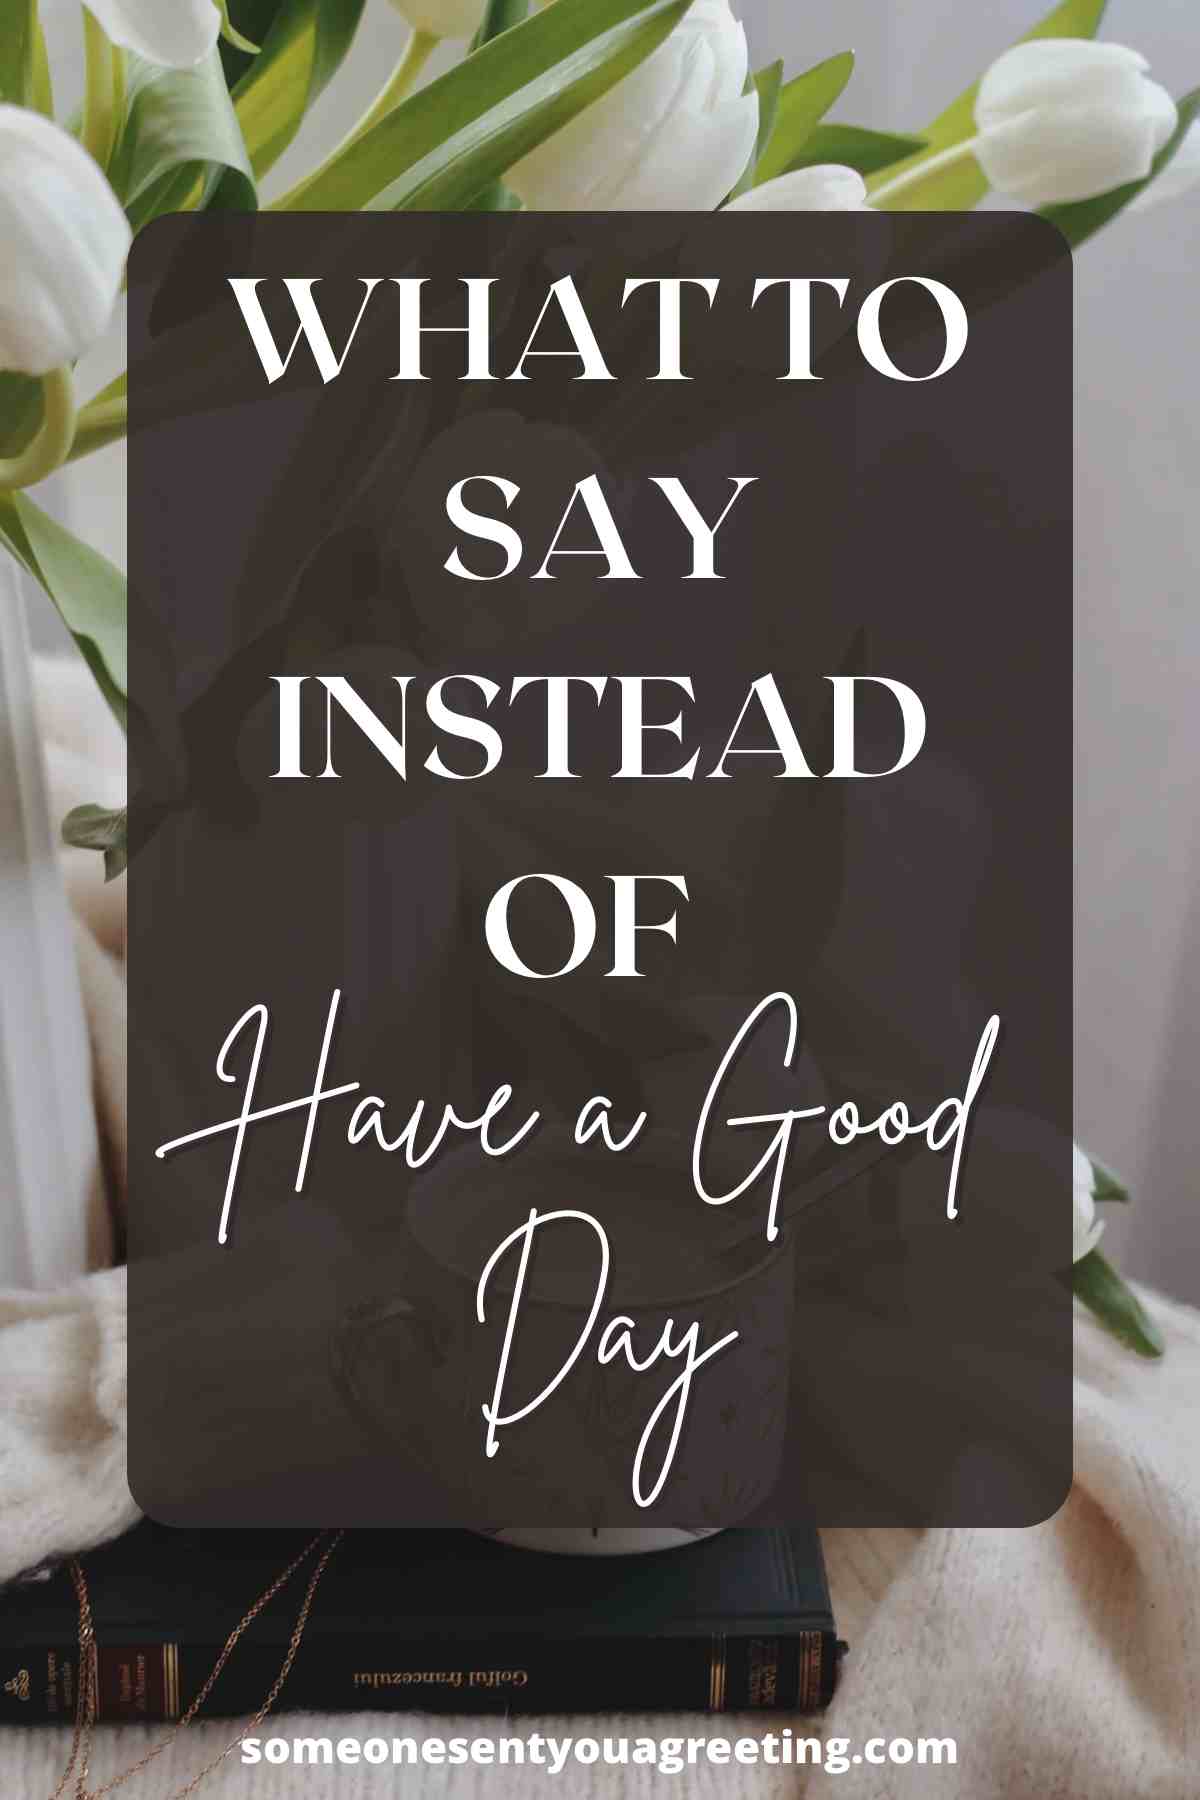 What to say instead of Have a good day